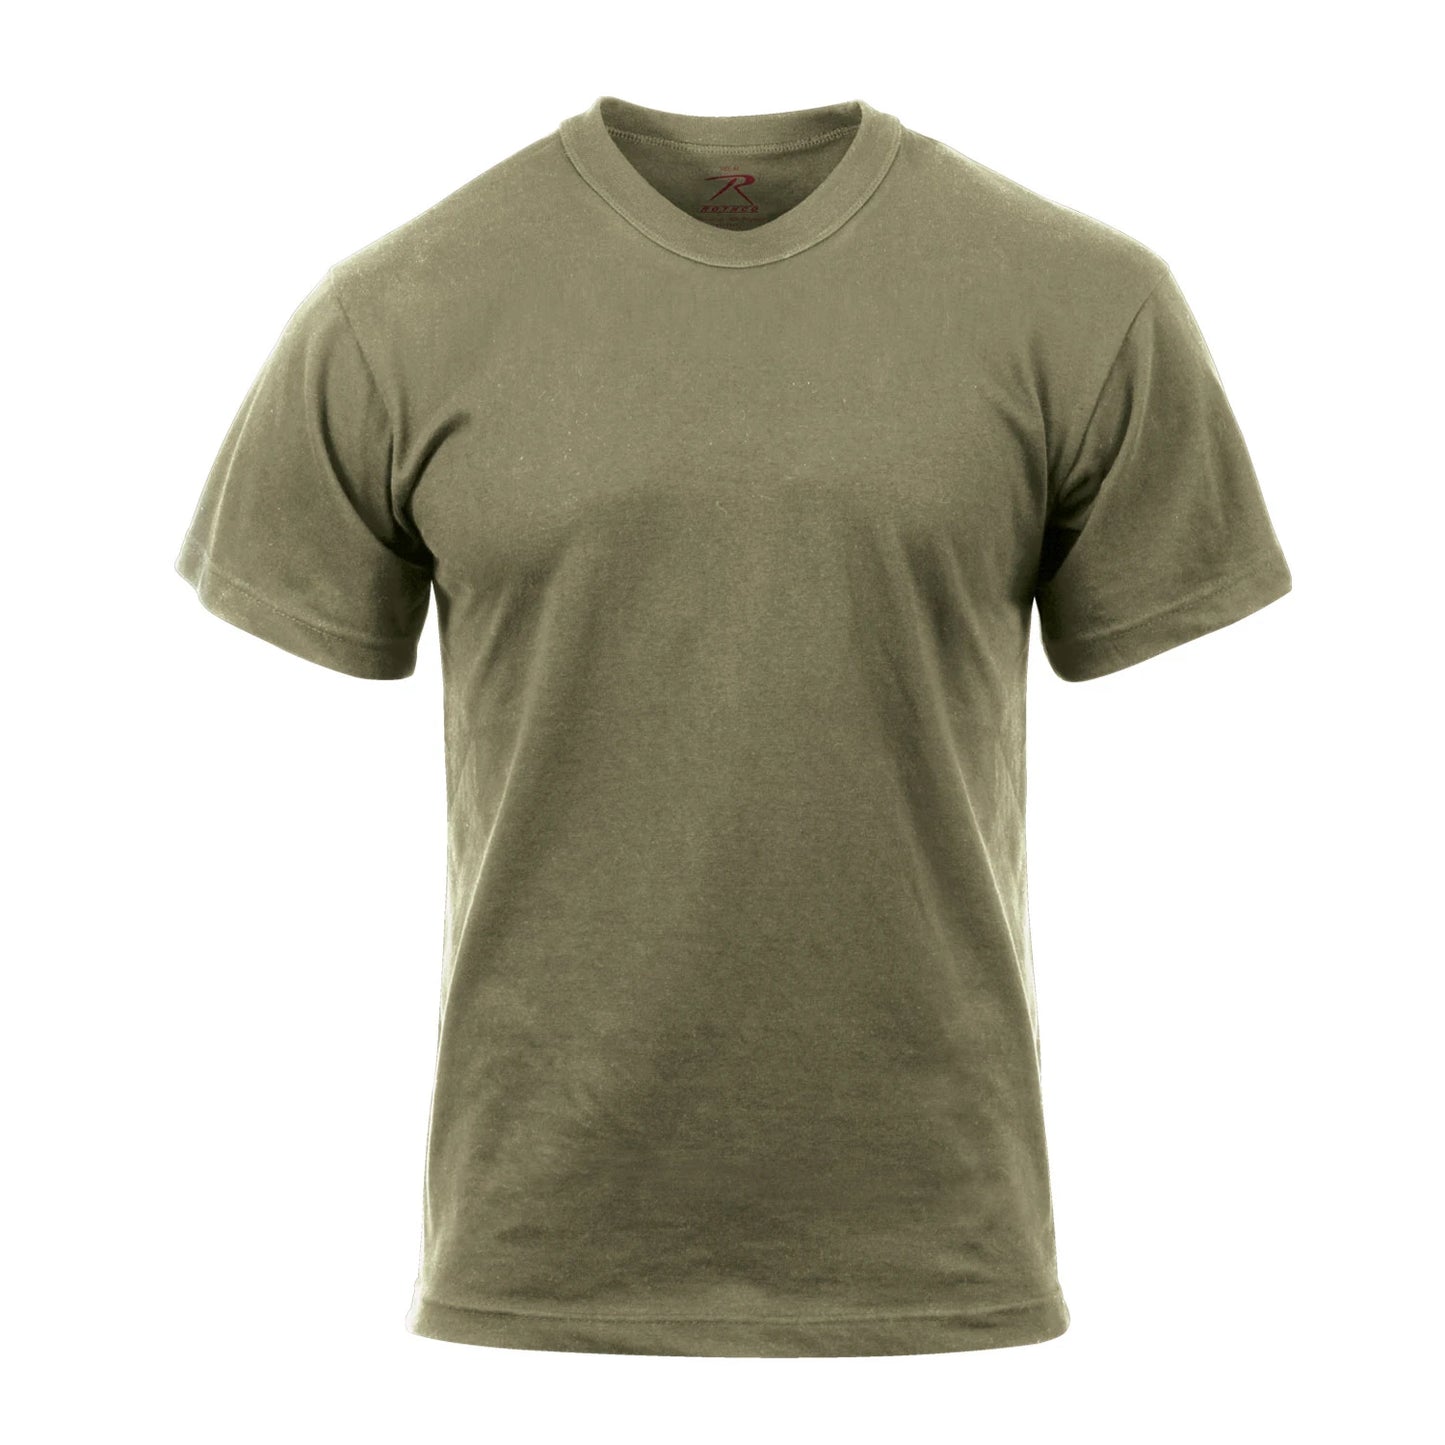 Rothco | AR 670-1 Coyote Brown 100% Cotton Short Sleeve T-Shirt